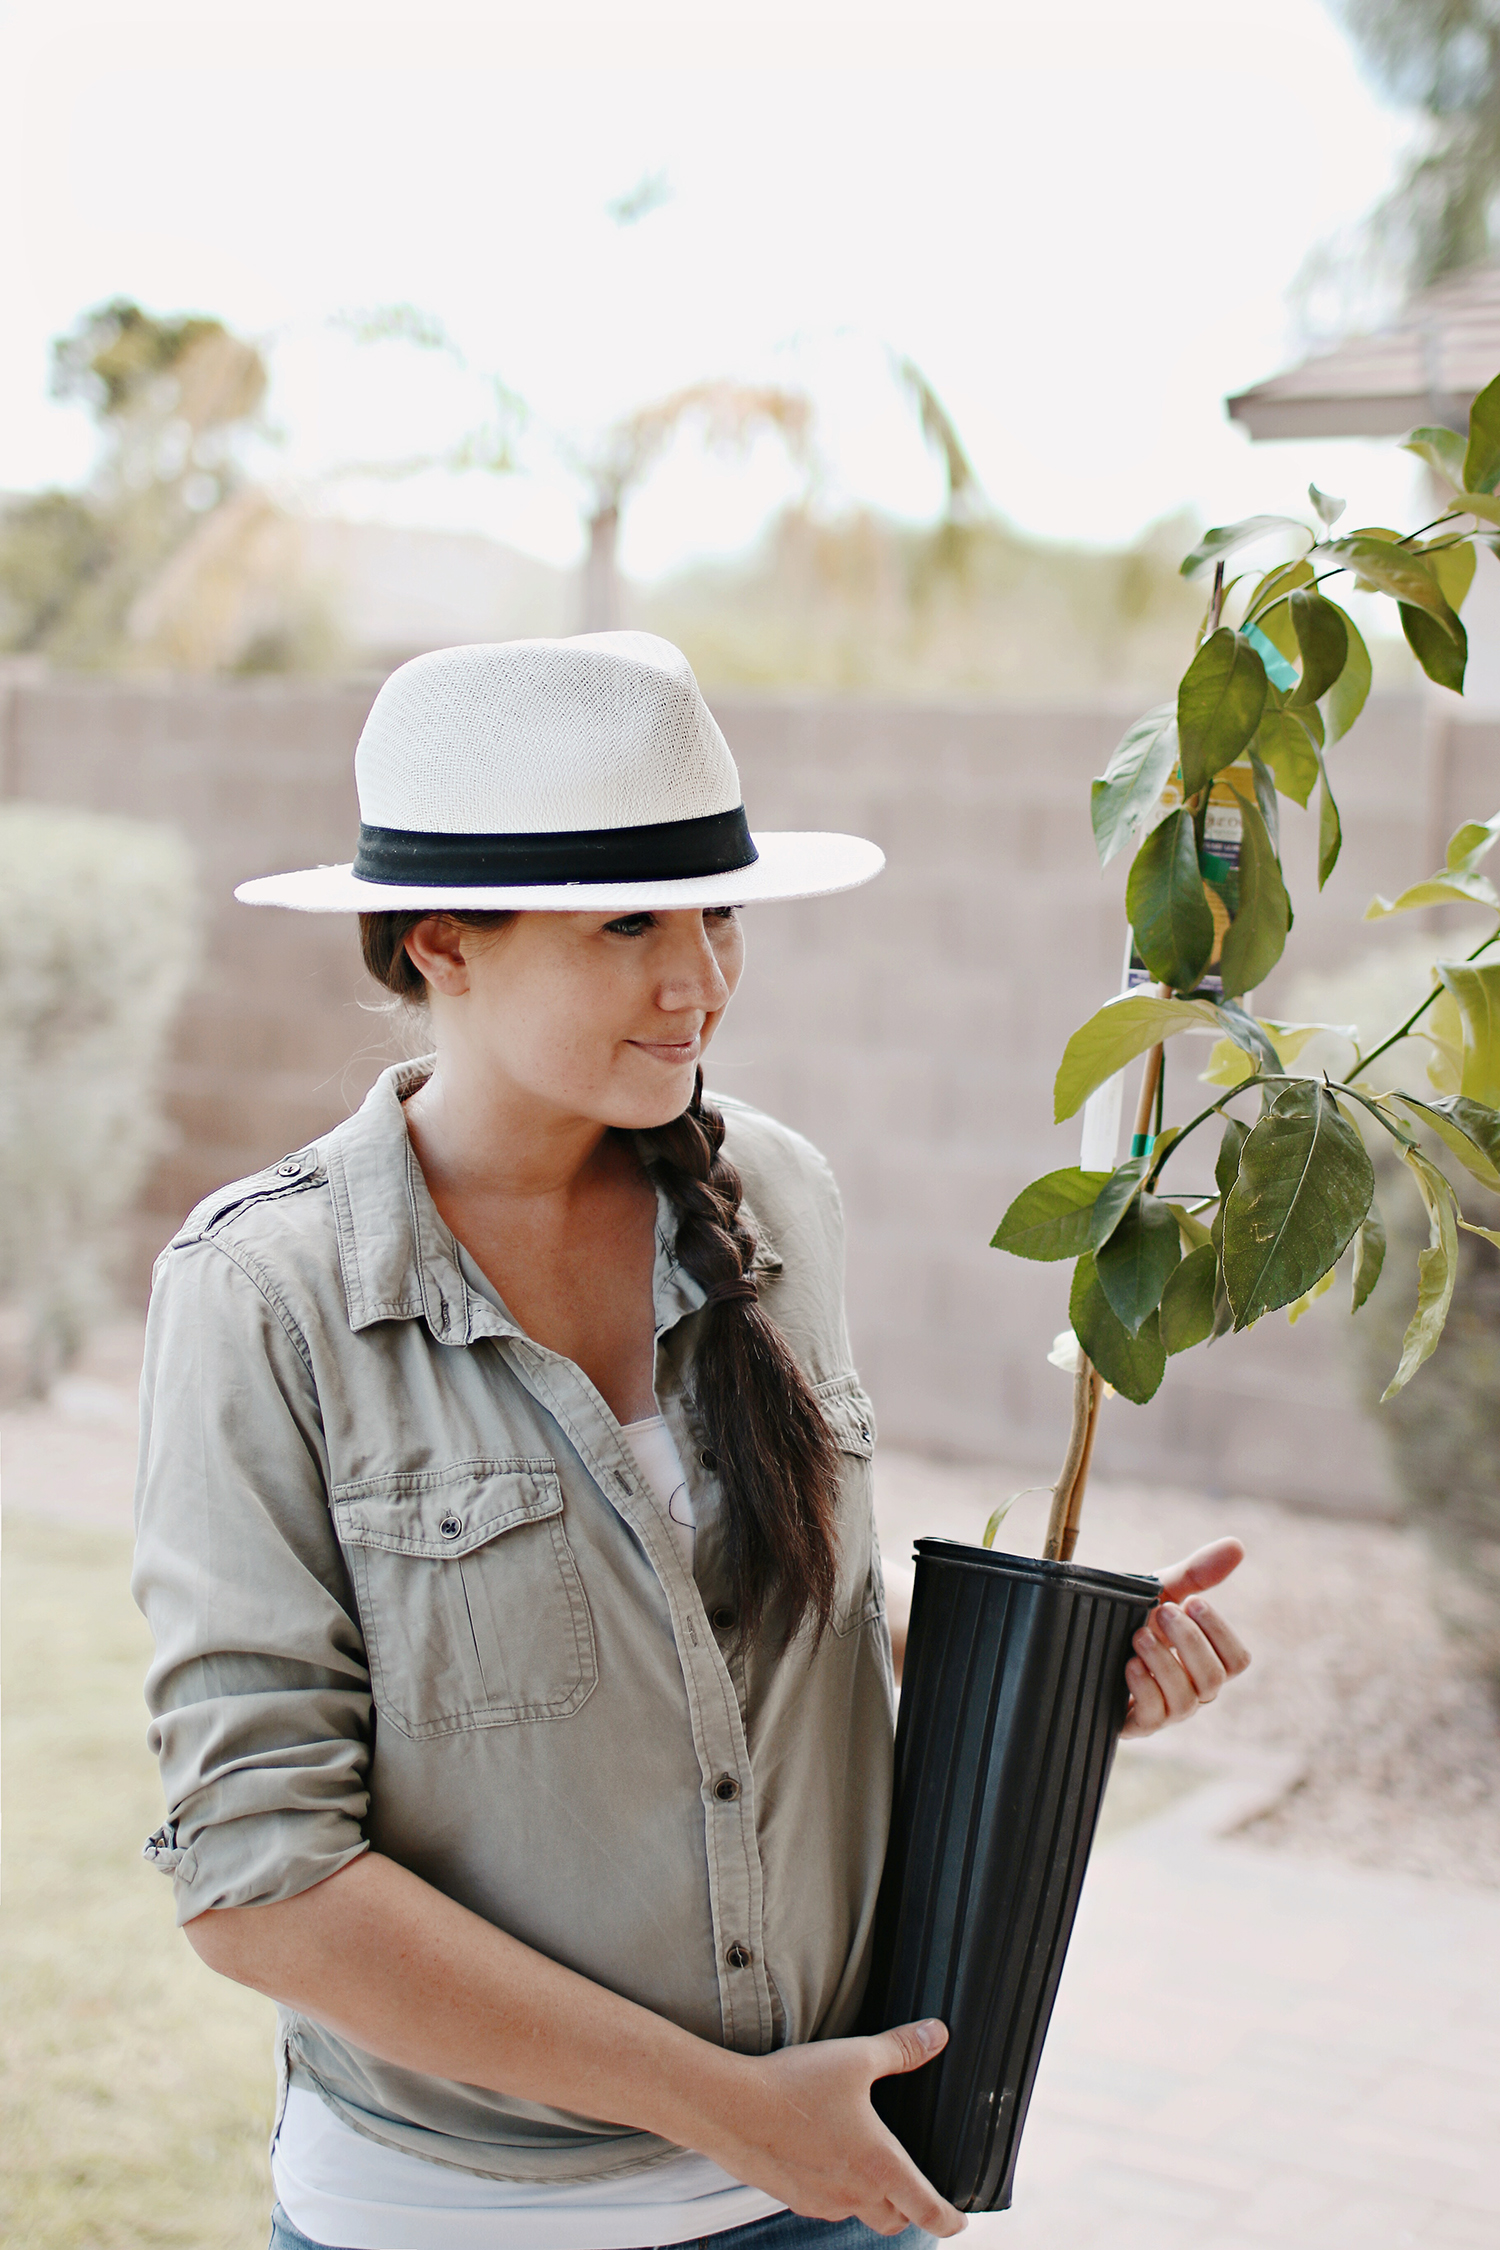 Learning to grow container lemon trees and the two new additions to our family. Learn more over at HausOfLayne.com! #Gardening #OutdoorSpace #LemonTree #ContainerLemonTrees